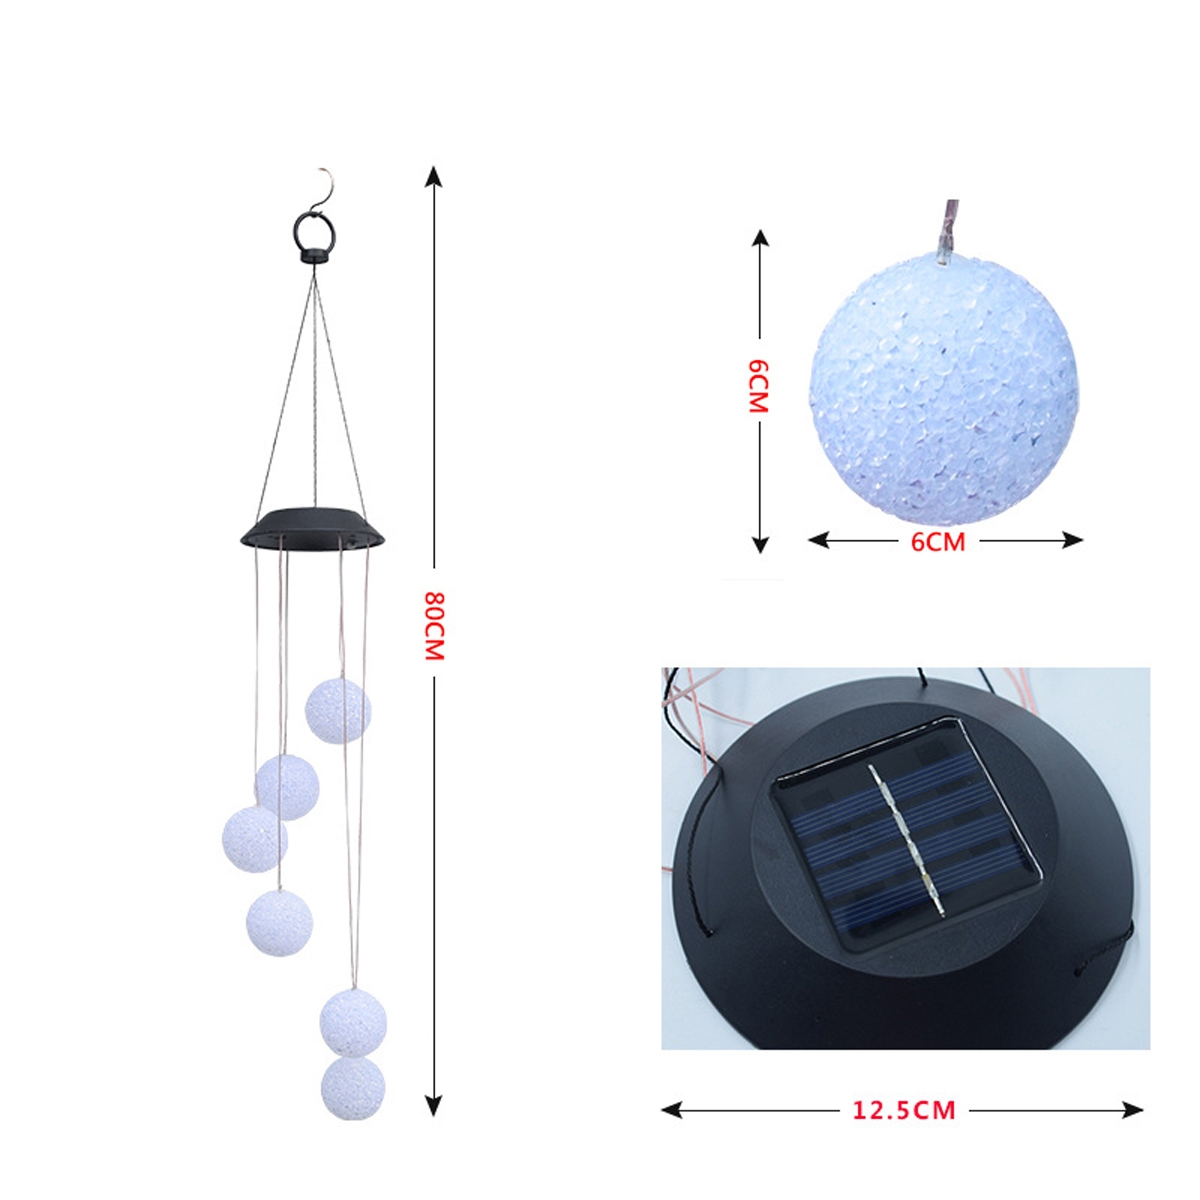 Aeolian-Hanging-Wind-Solar-LED-Lights-Chimes-Powered-String-Lawn-Garden-Lamp-1642749-10